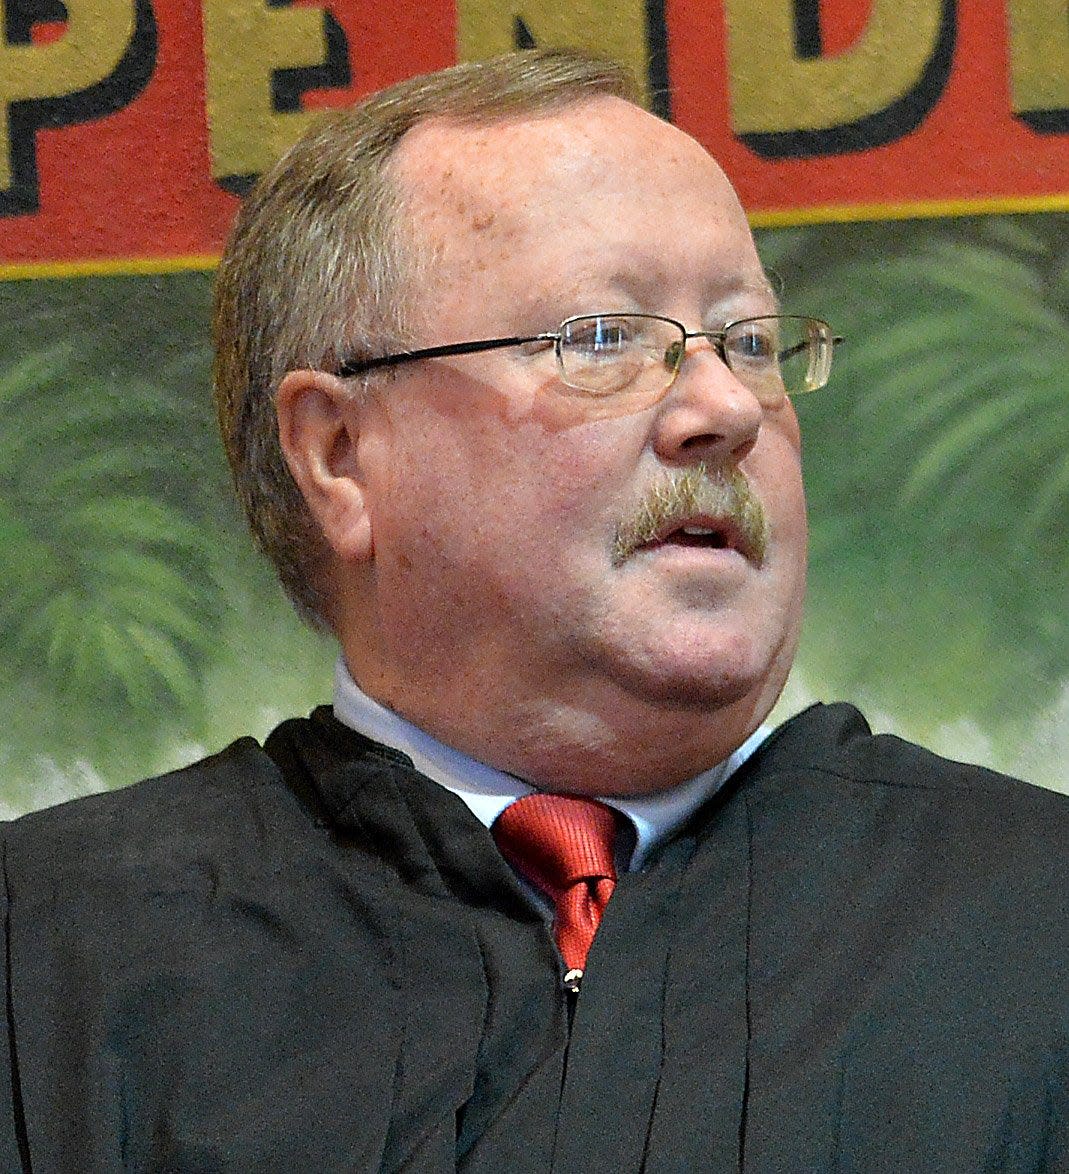 Erie County President Judge Joseph M. Walsh III ruled against the city of Erie in an appeal in a case under the Right-to-Know Law.